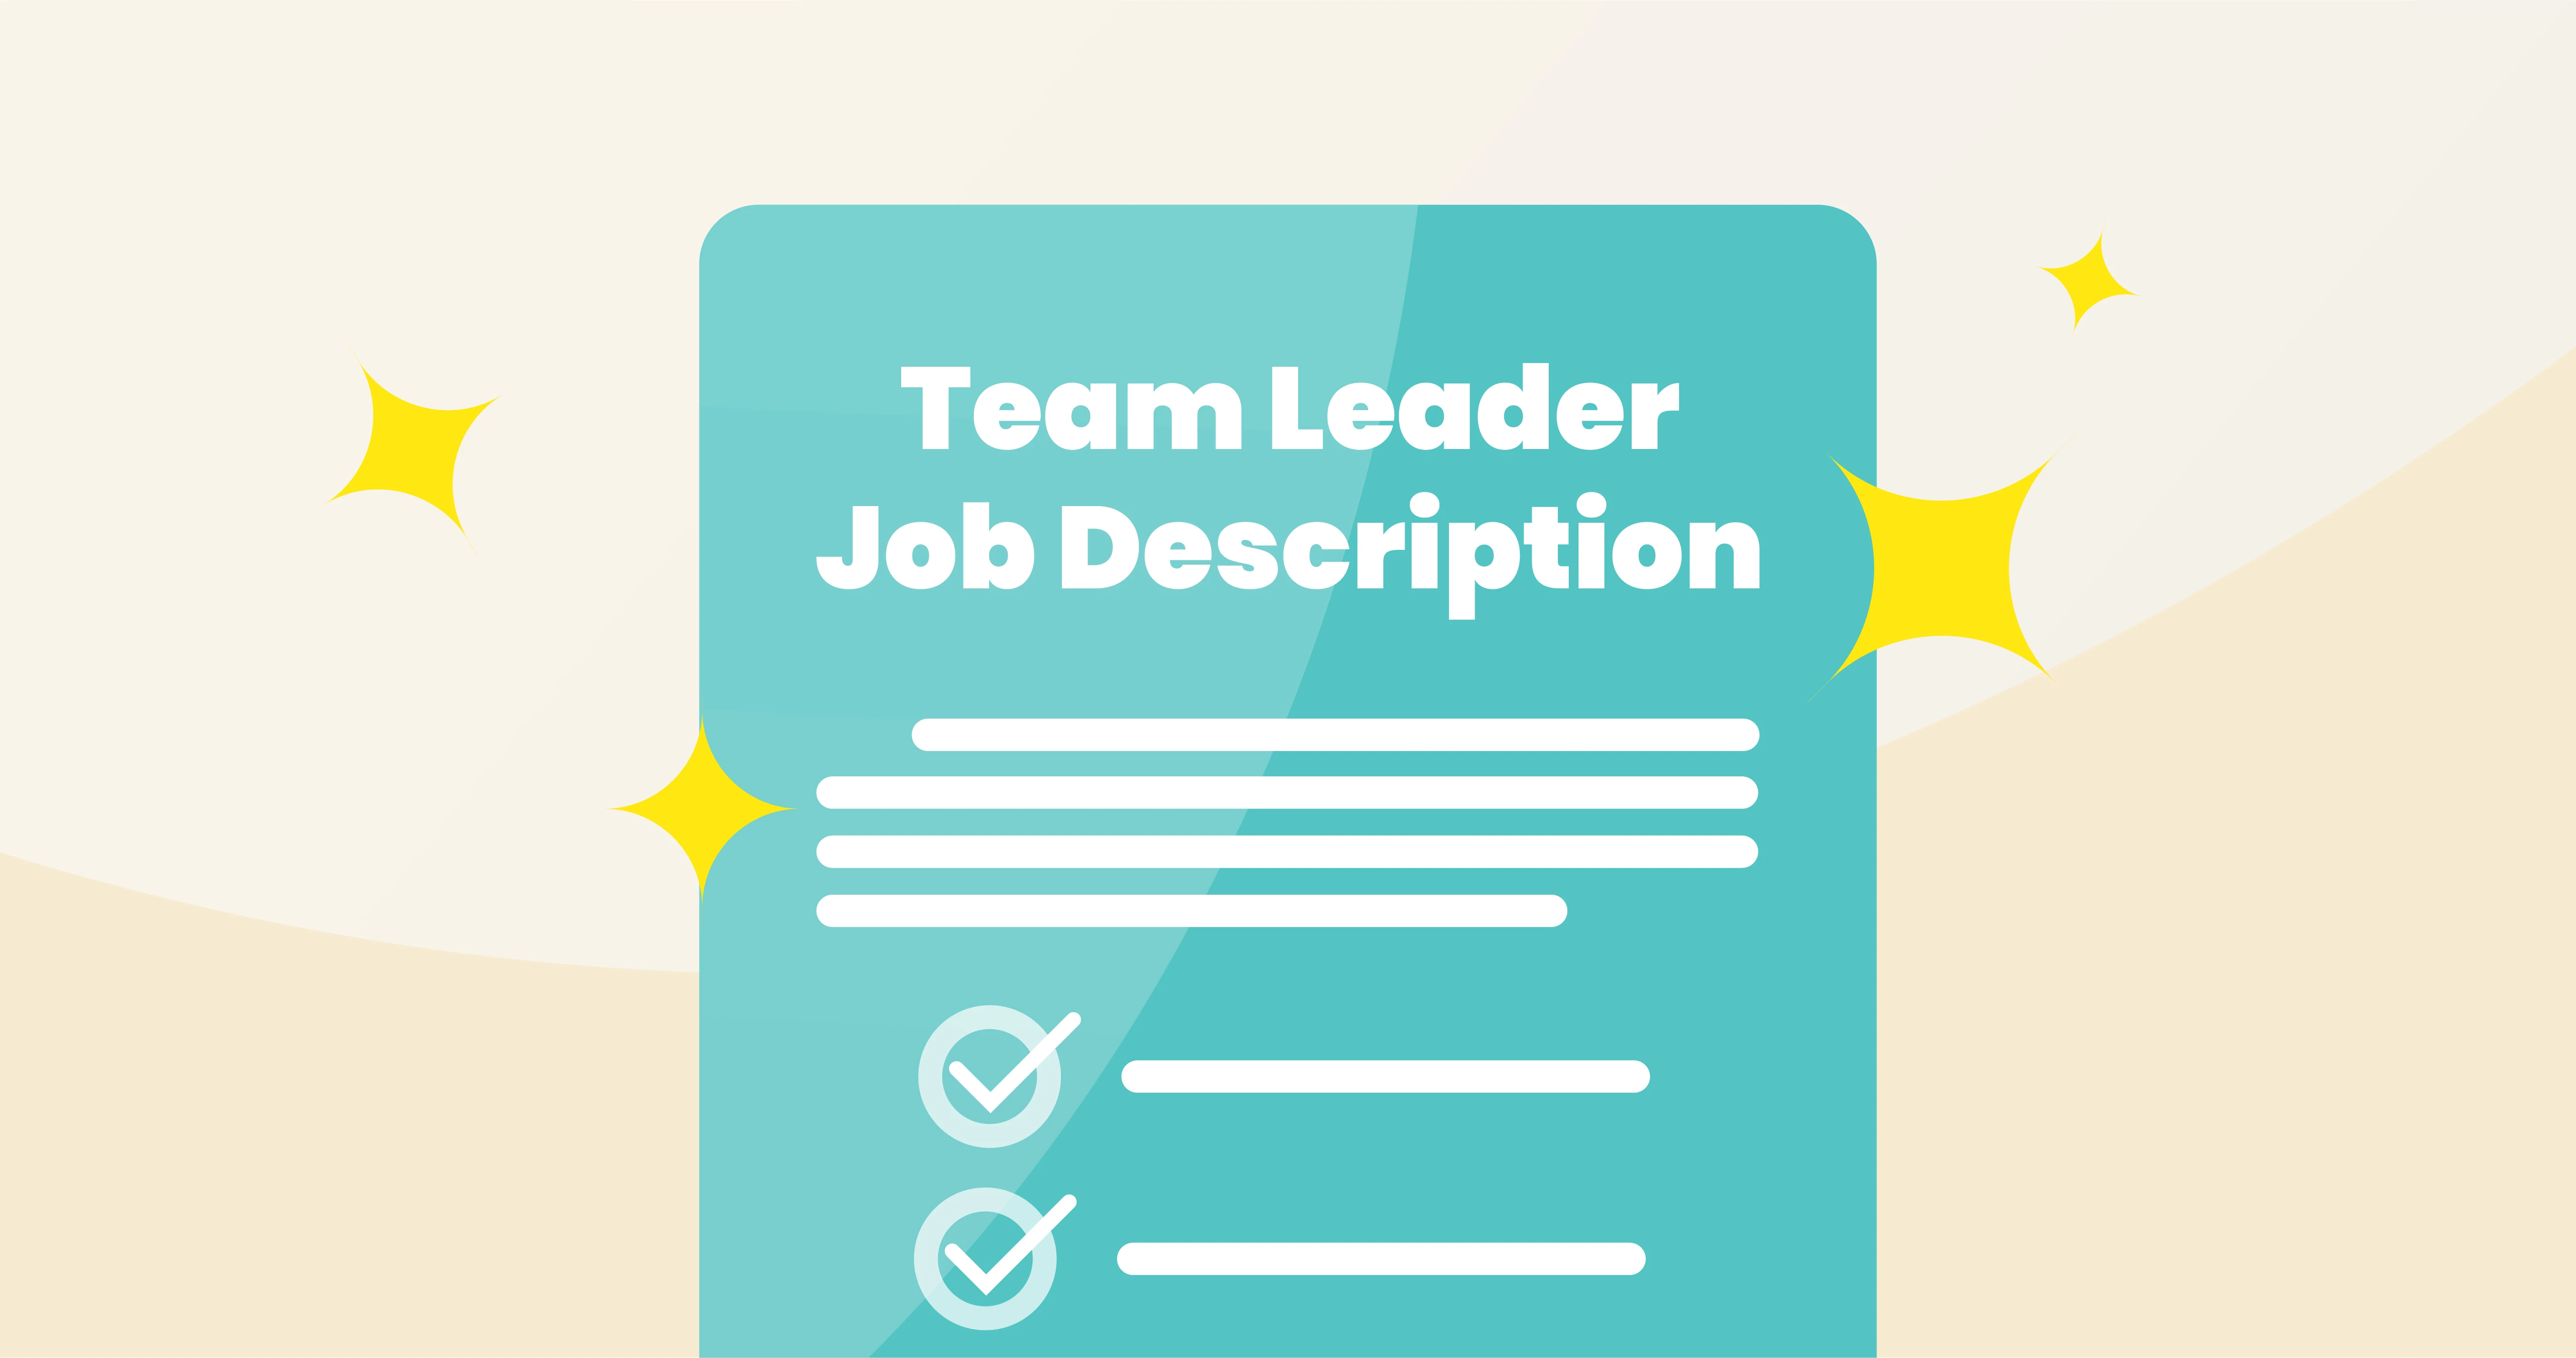 What Does a Team Leader Job Description Look Like?